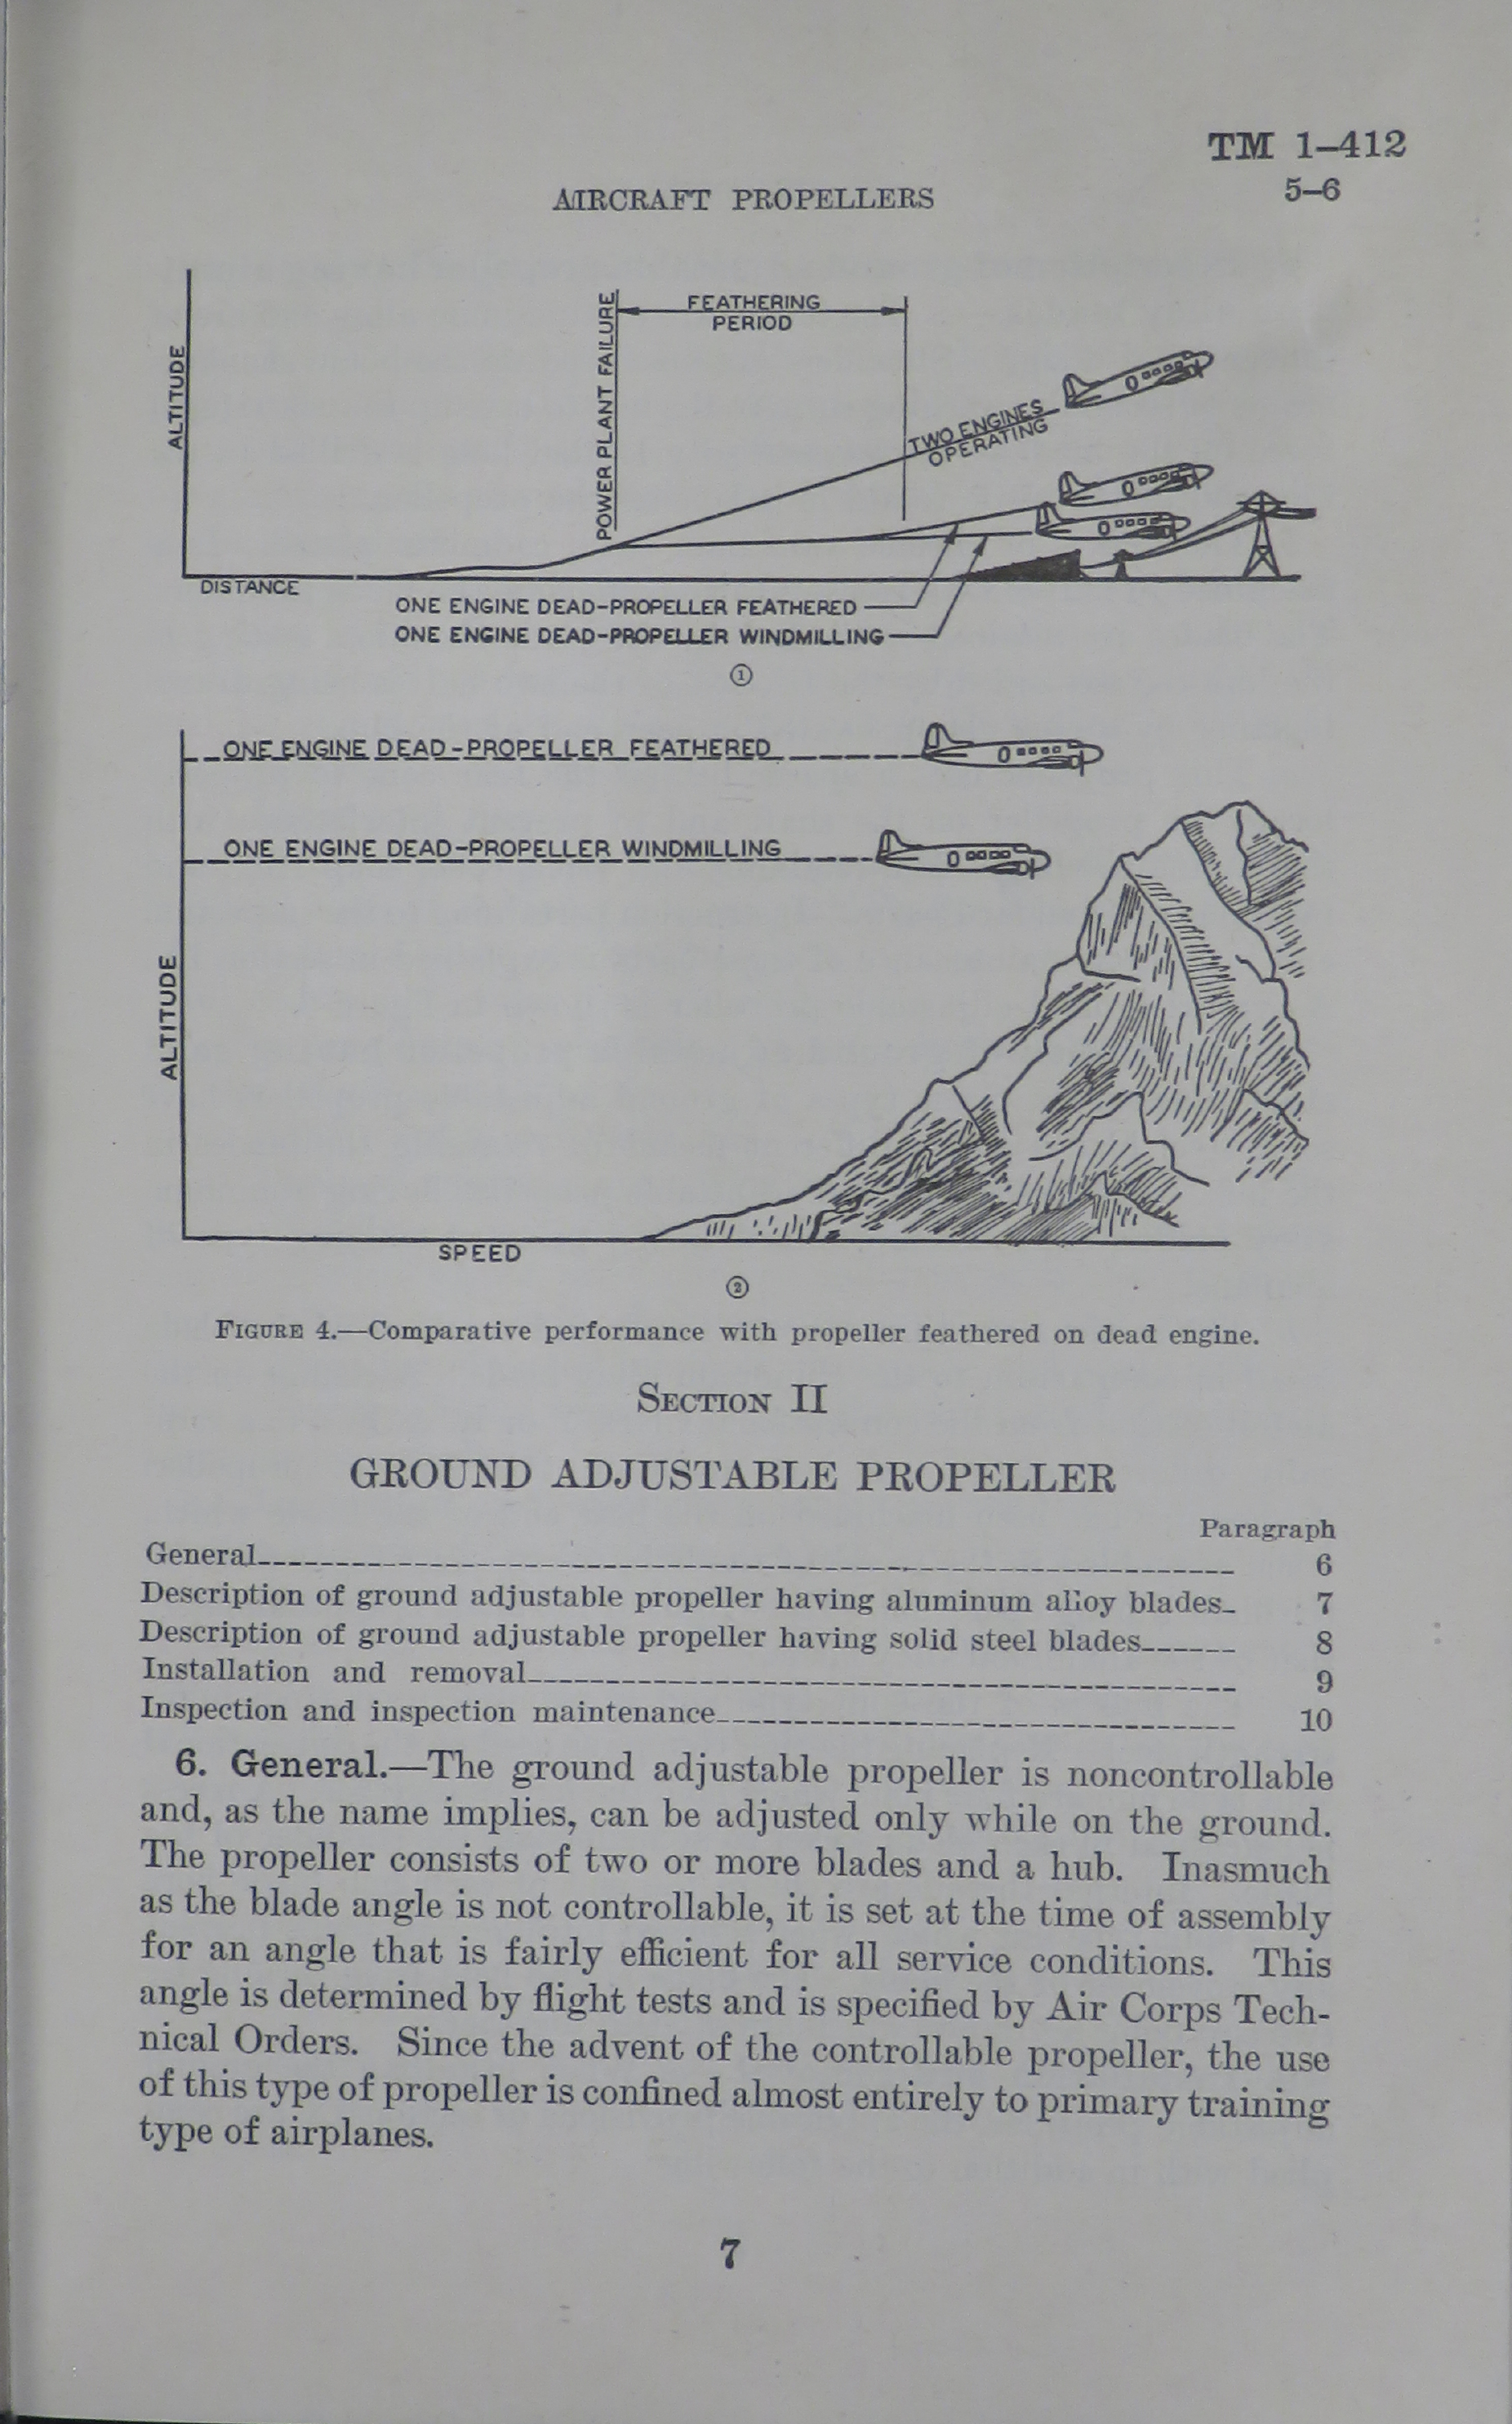 Sample page 9 from AirCorps Library document: Technical Manual for Aircraft Propellers